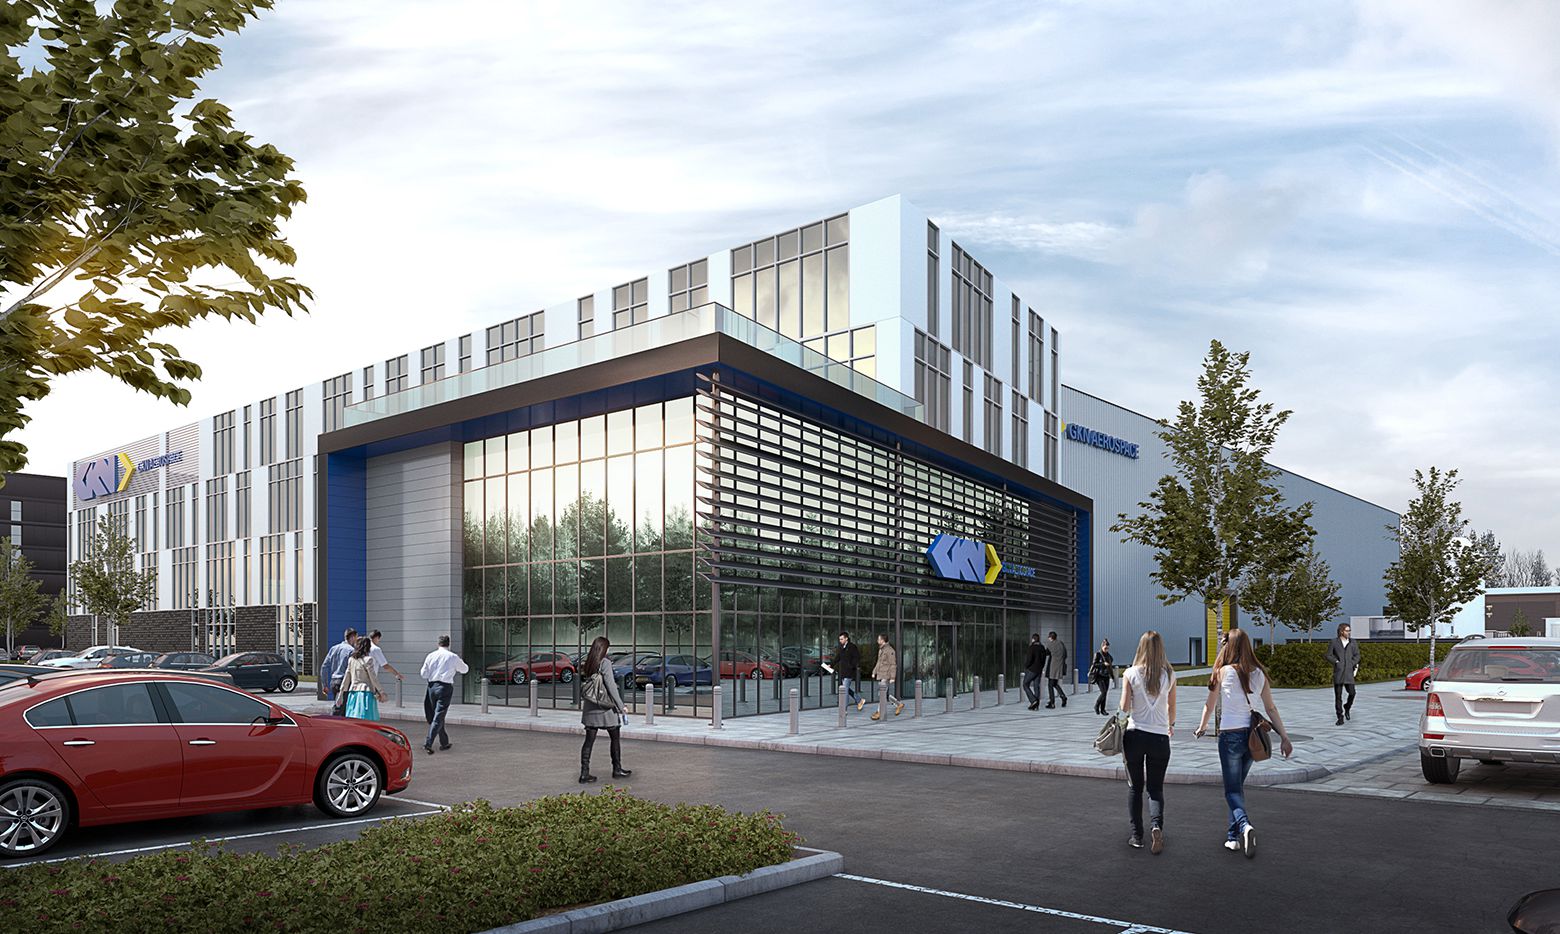 GKN Aerospace opened a technology center in the United Kingdom in October 2021.